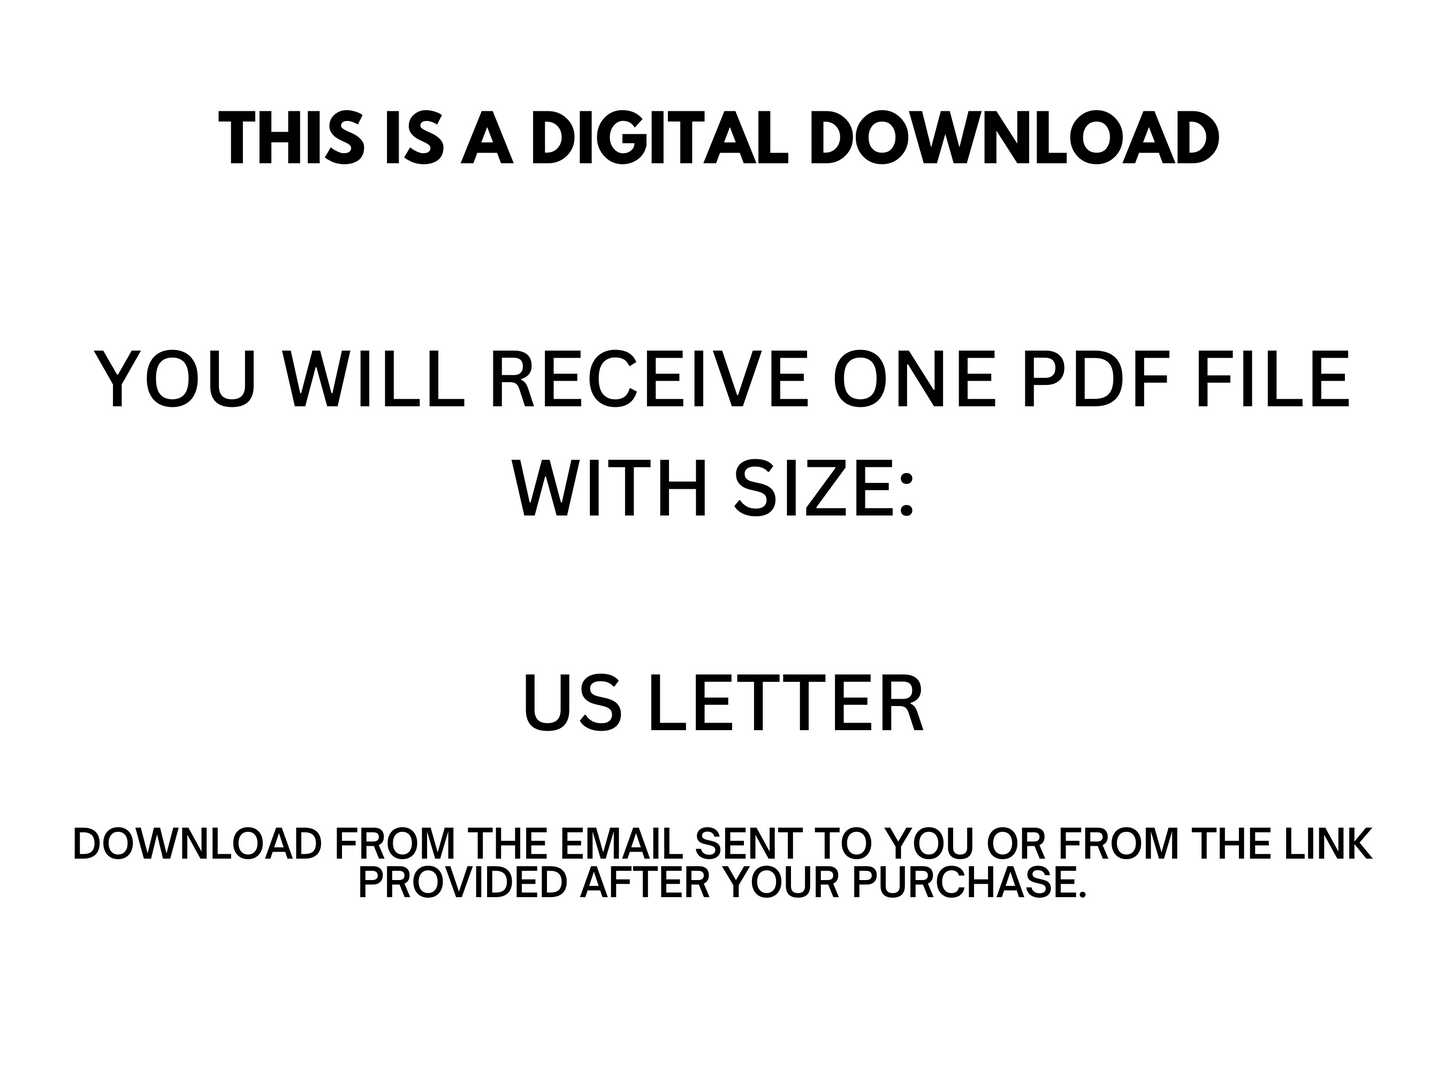 Statement stating this is a digital download in US letter.